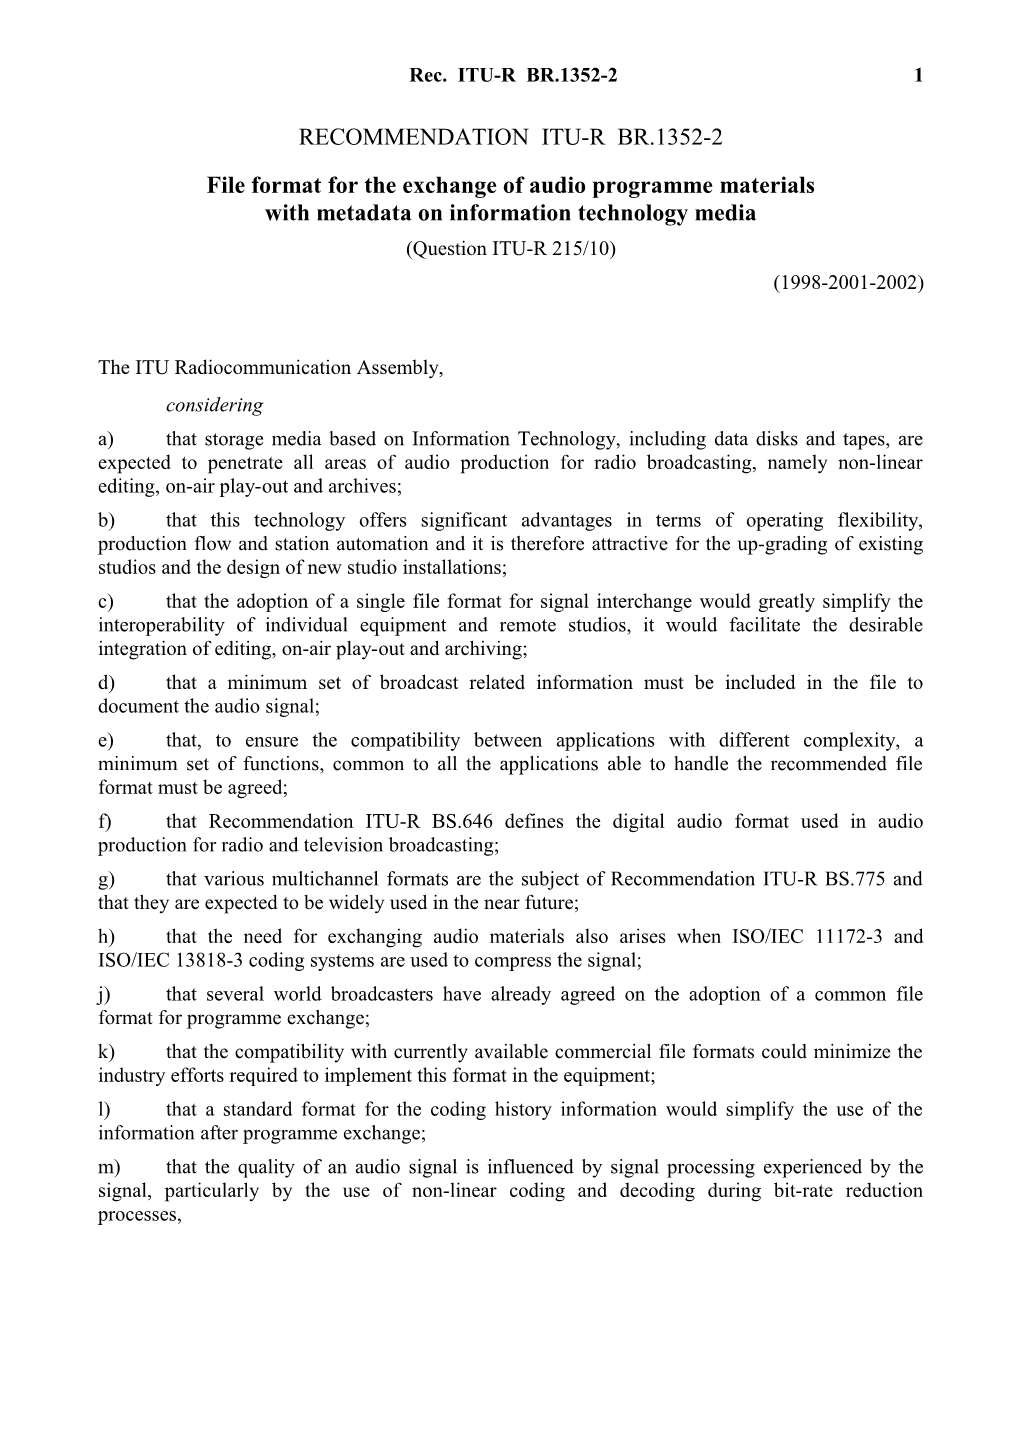 RECOMMENDATION ITU-R BR.1352-2 - File Format for the Exchange of Audio Programme Materials